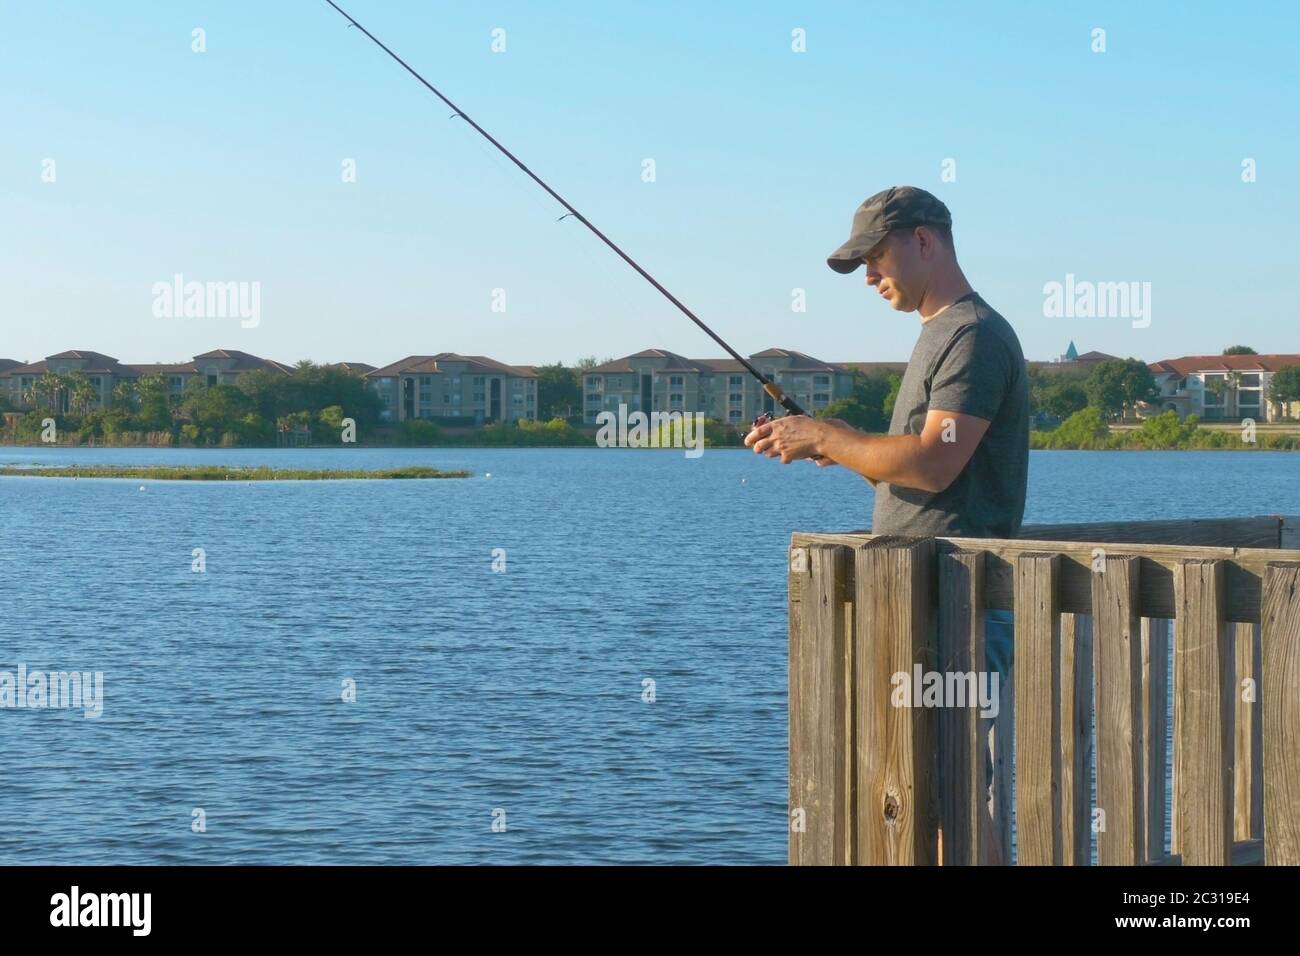 Fisherman cast fishing rod in lake or river water. Stock Photo